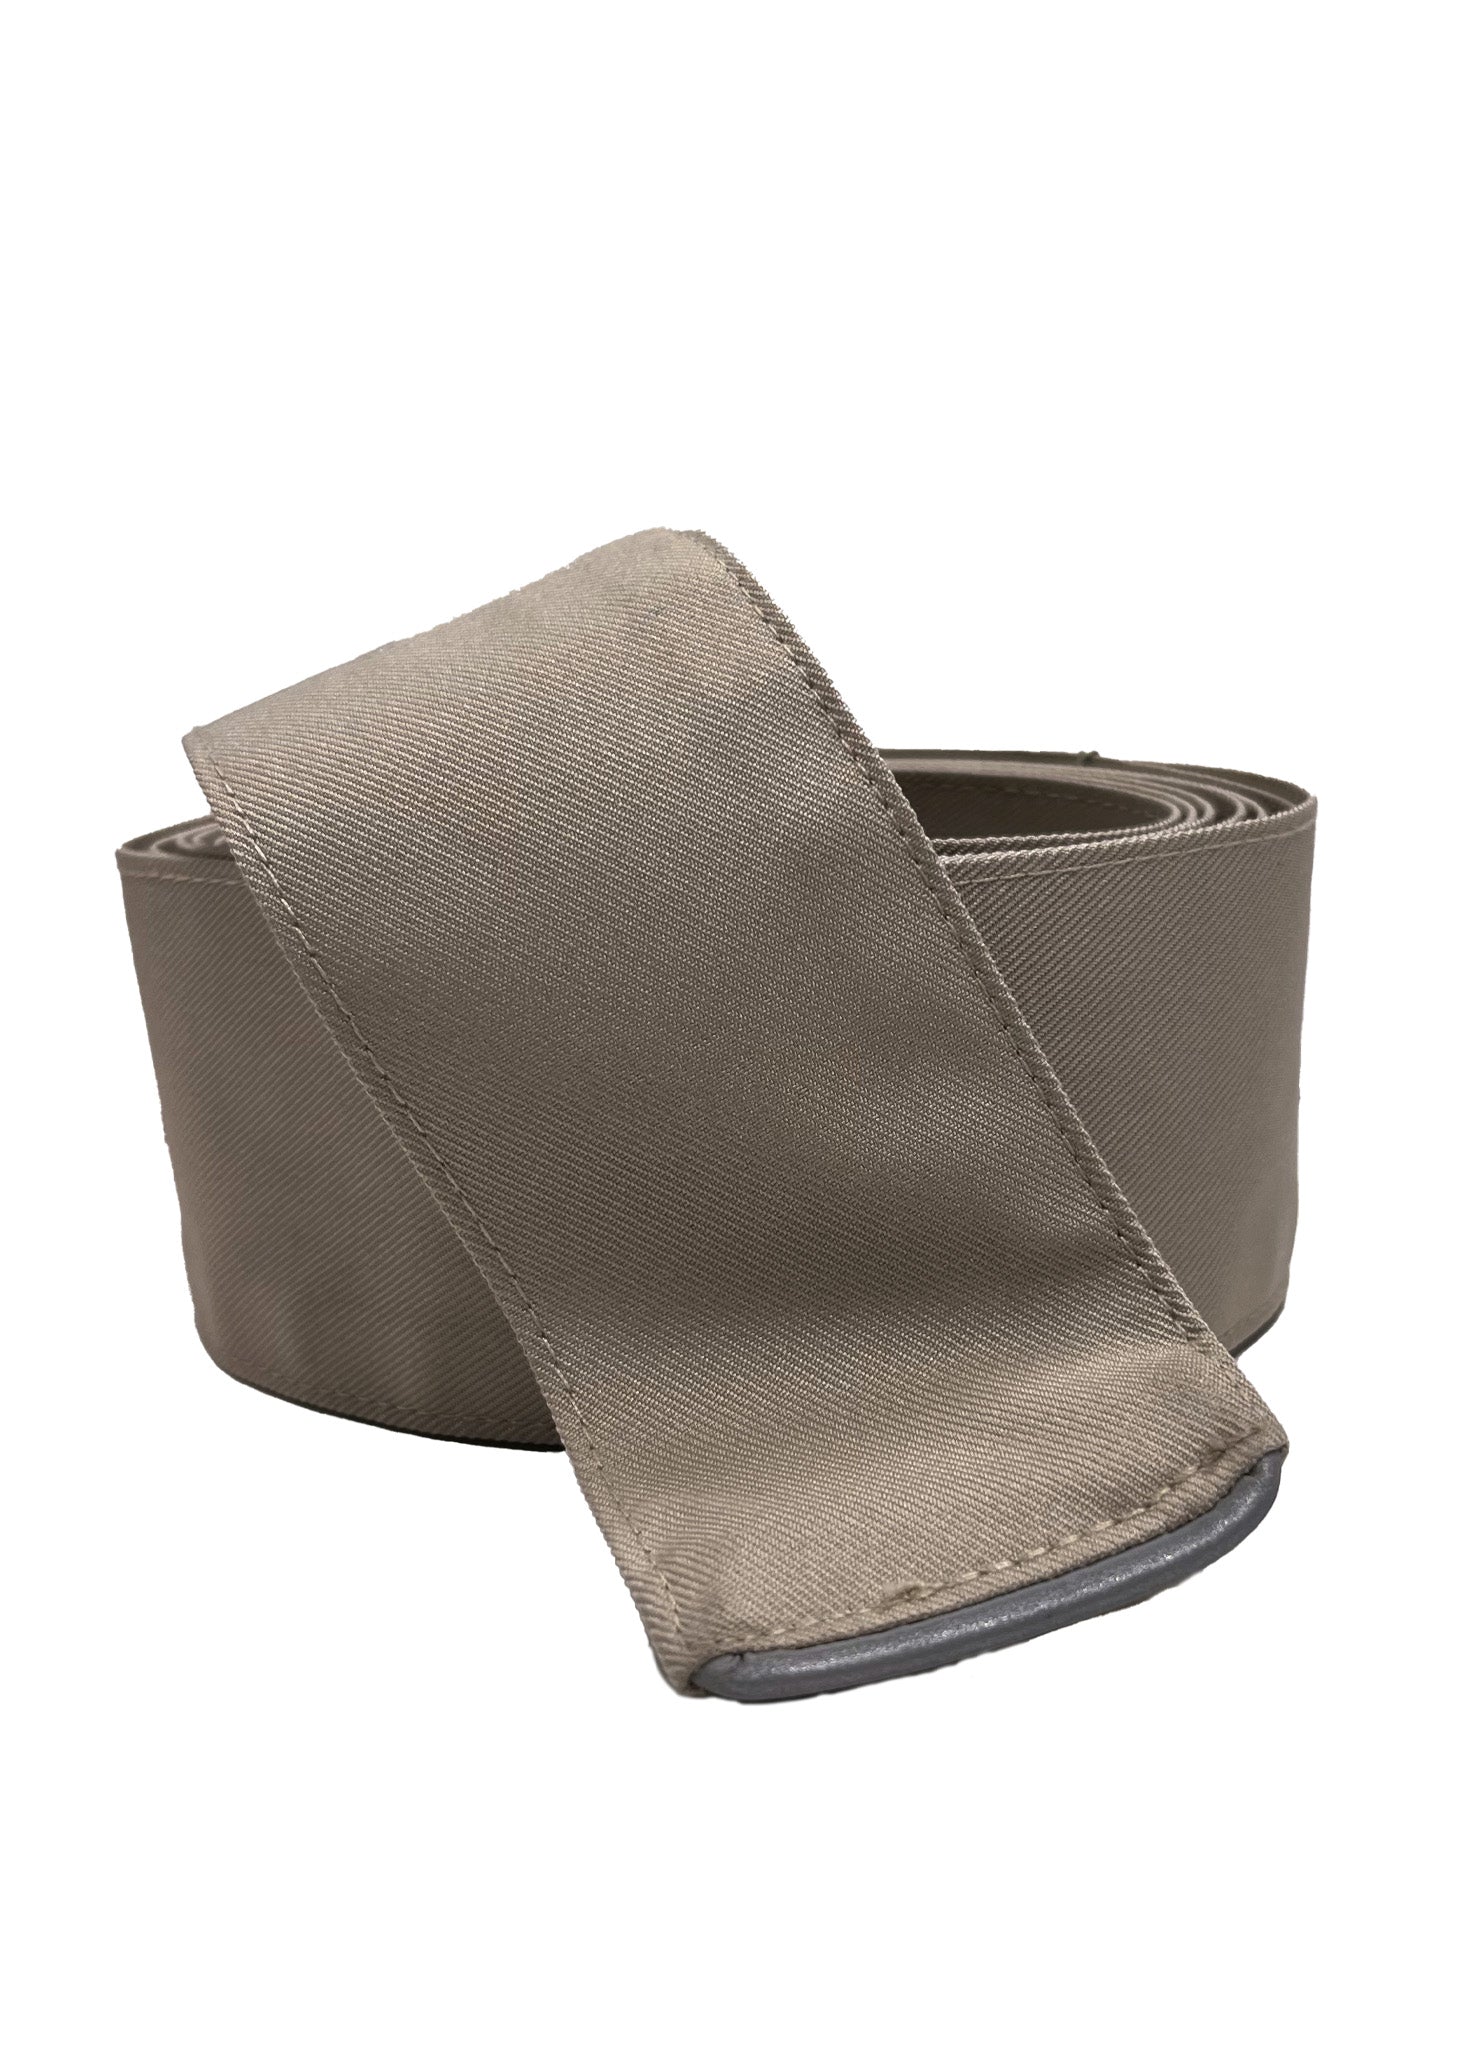 BRGN Belt Accessories 141 Taupe